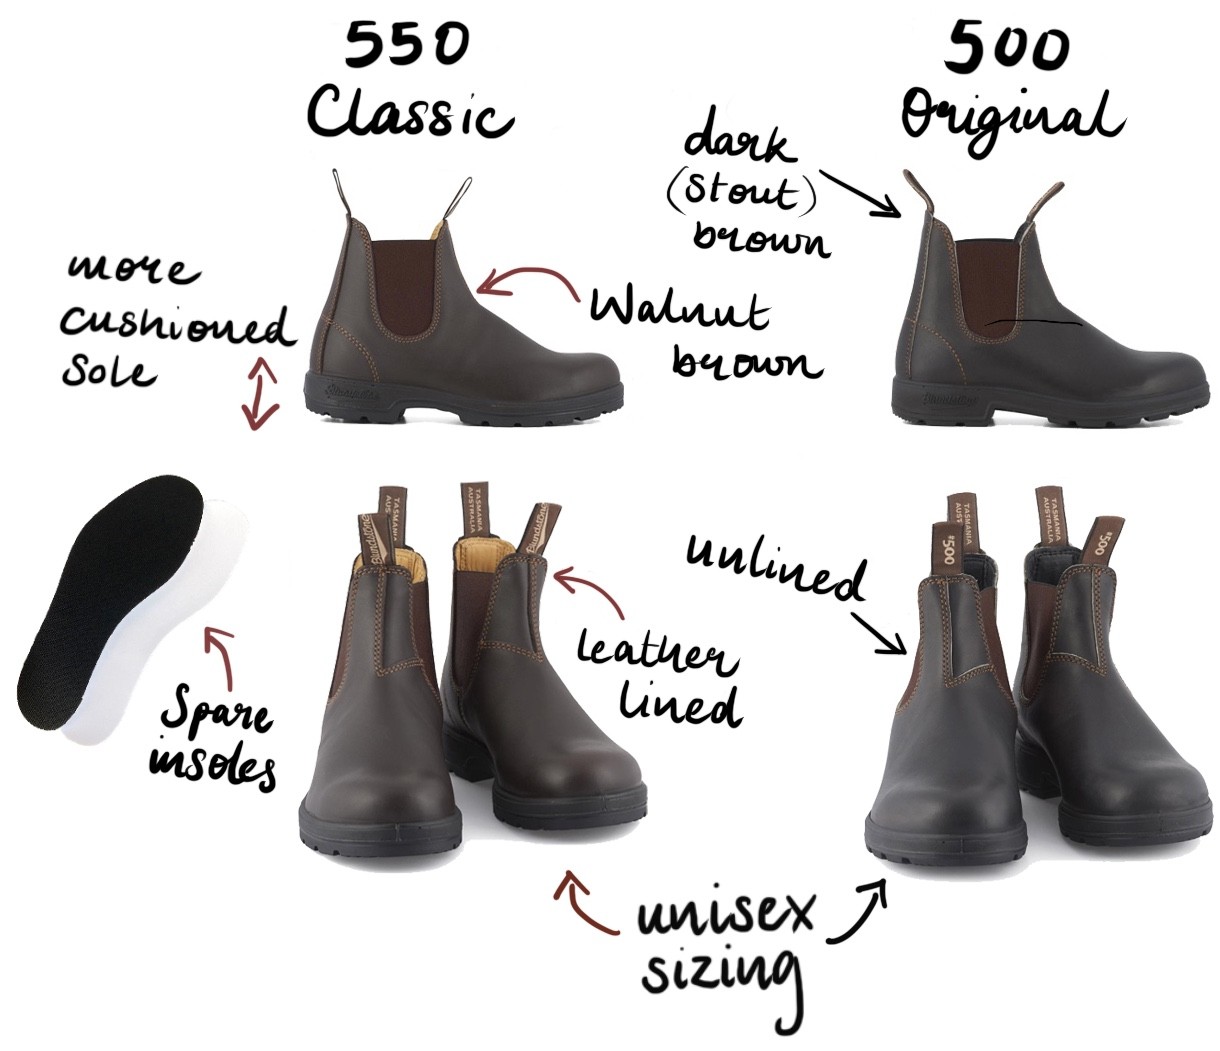 Are Blundstone 1306 As Good As 550? - Shoe Effect